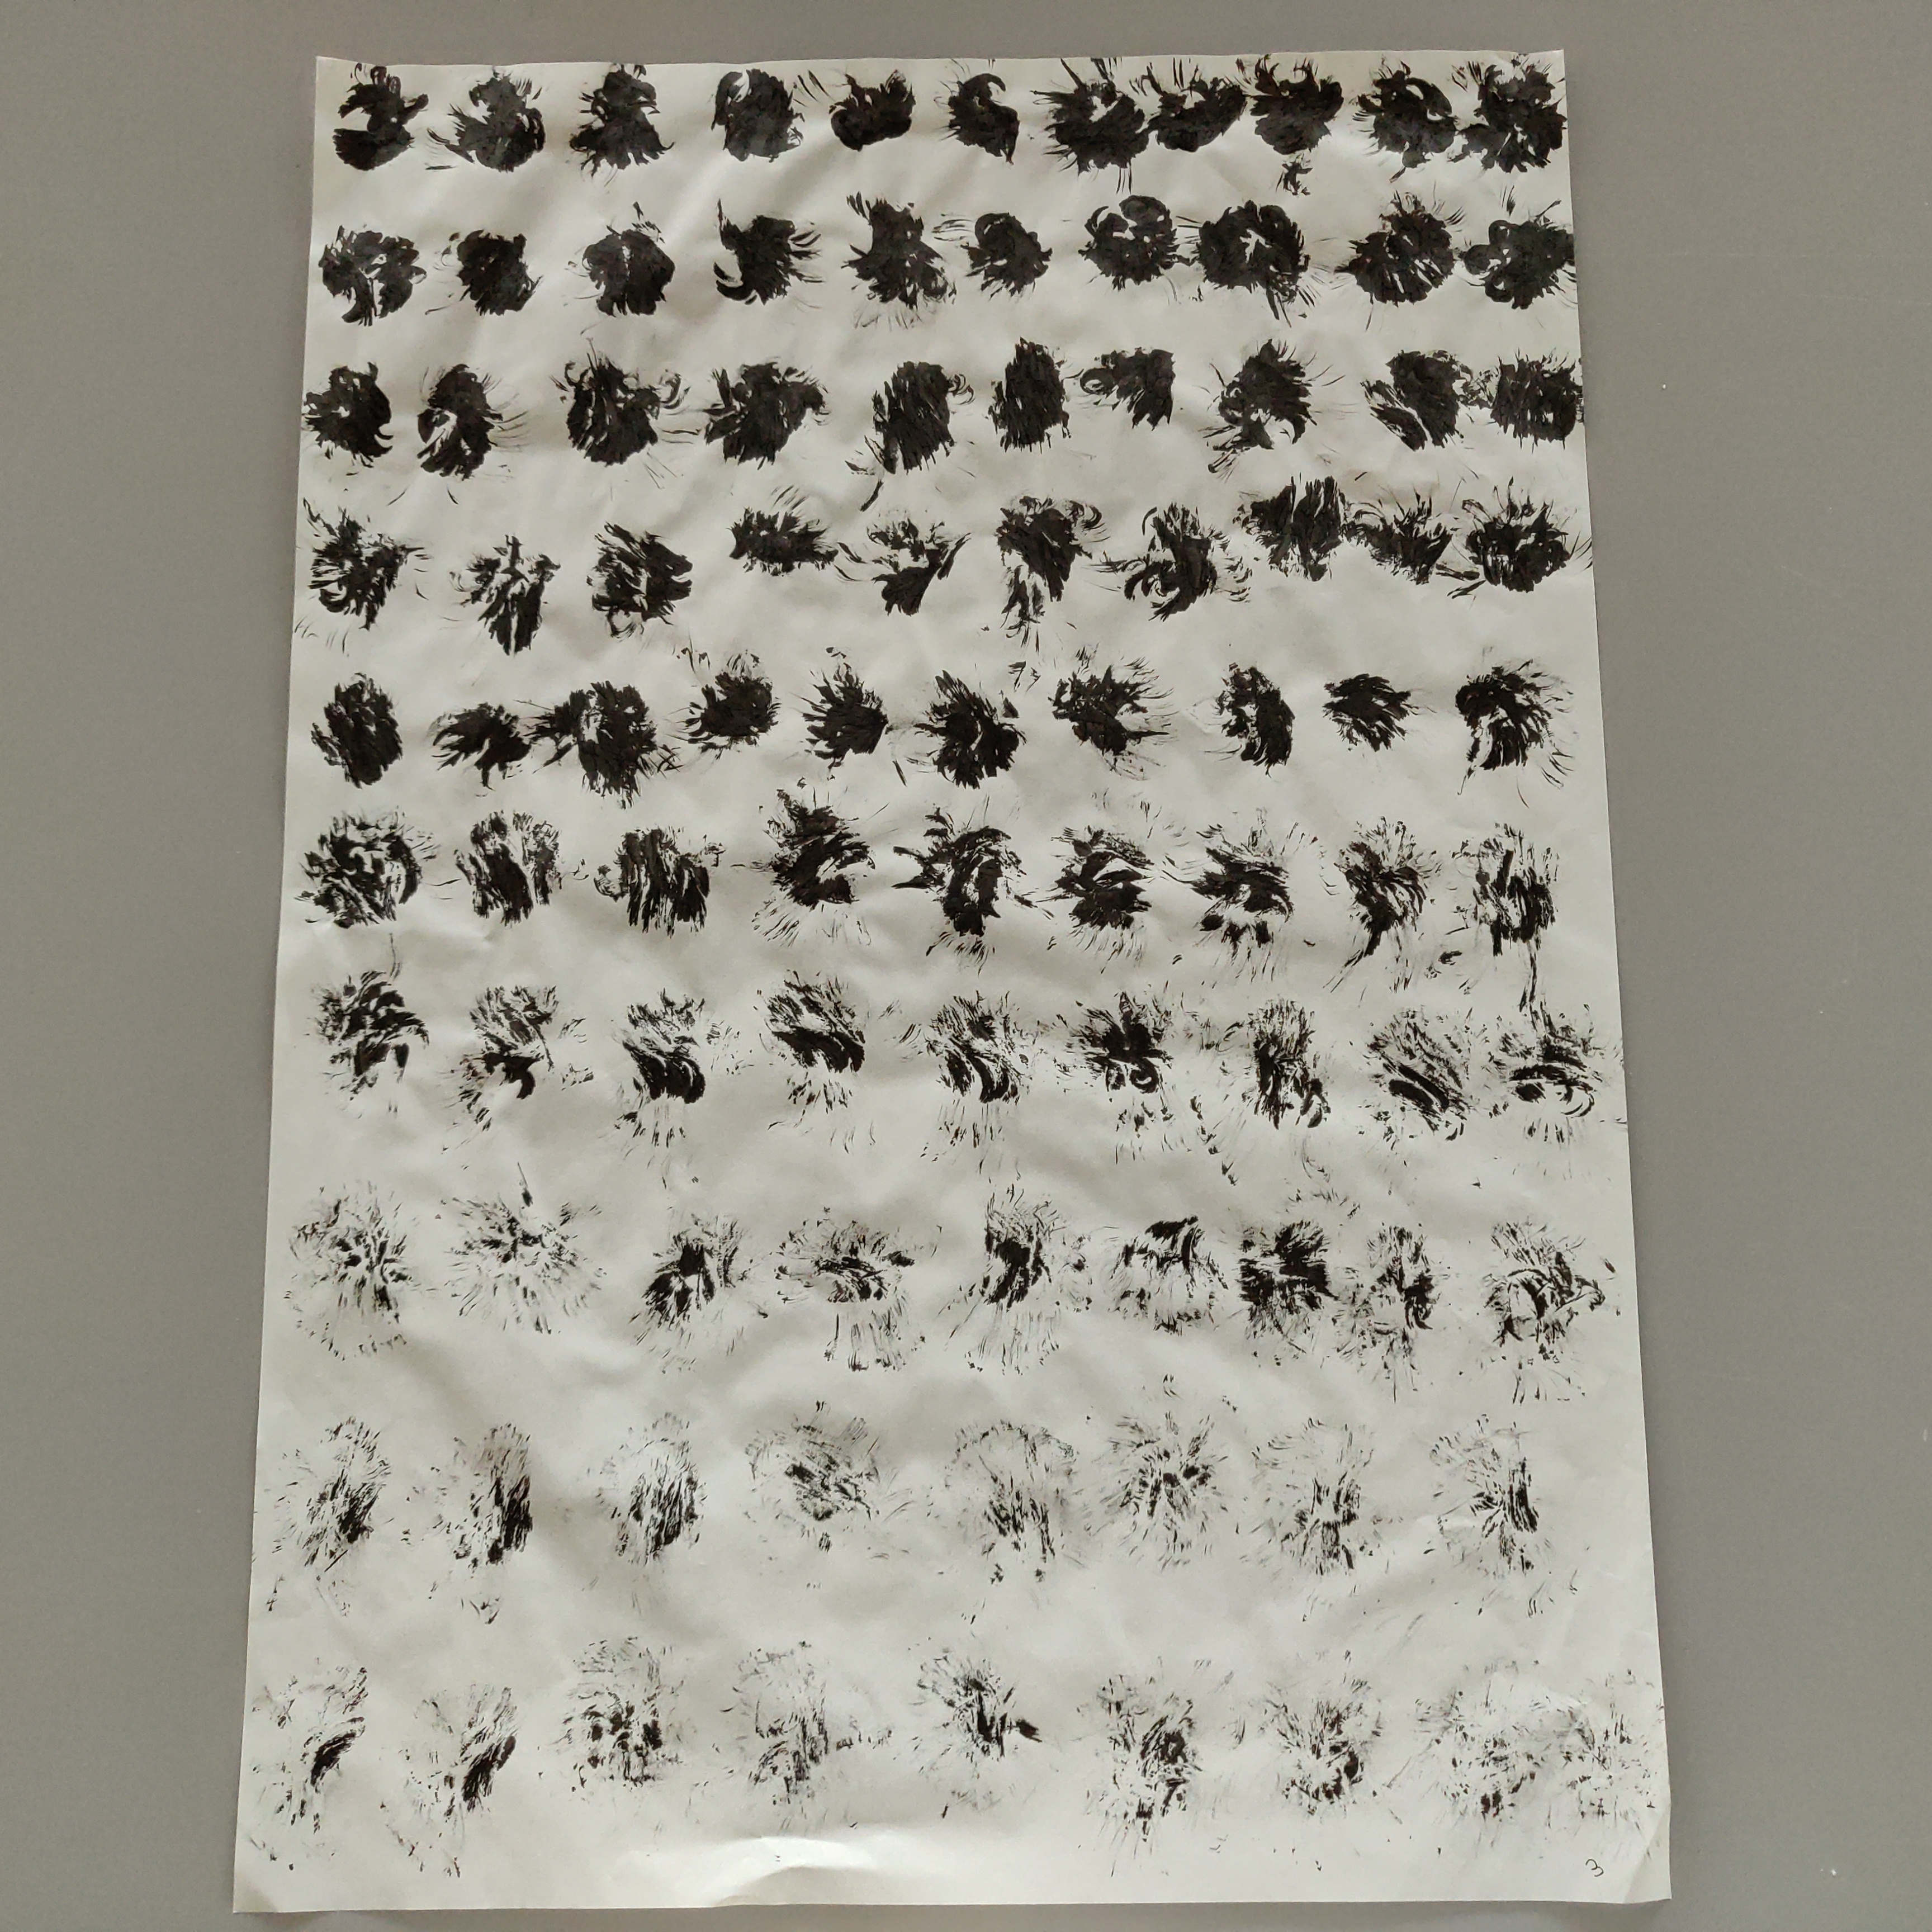 photograph of an abstract drawing, black ink on paper, rows of black dots that slowly dissipate and fade as the ink runs out